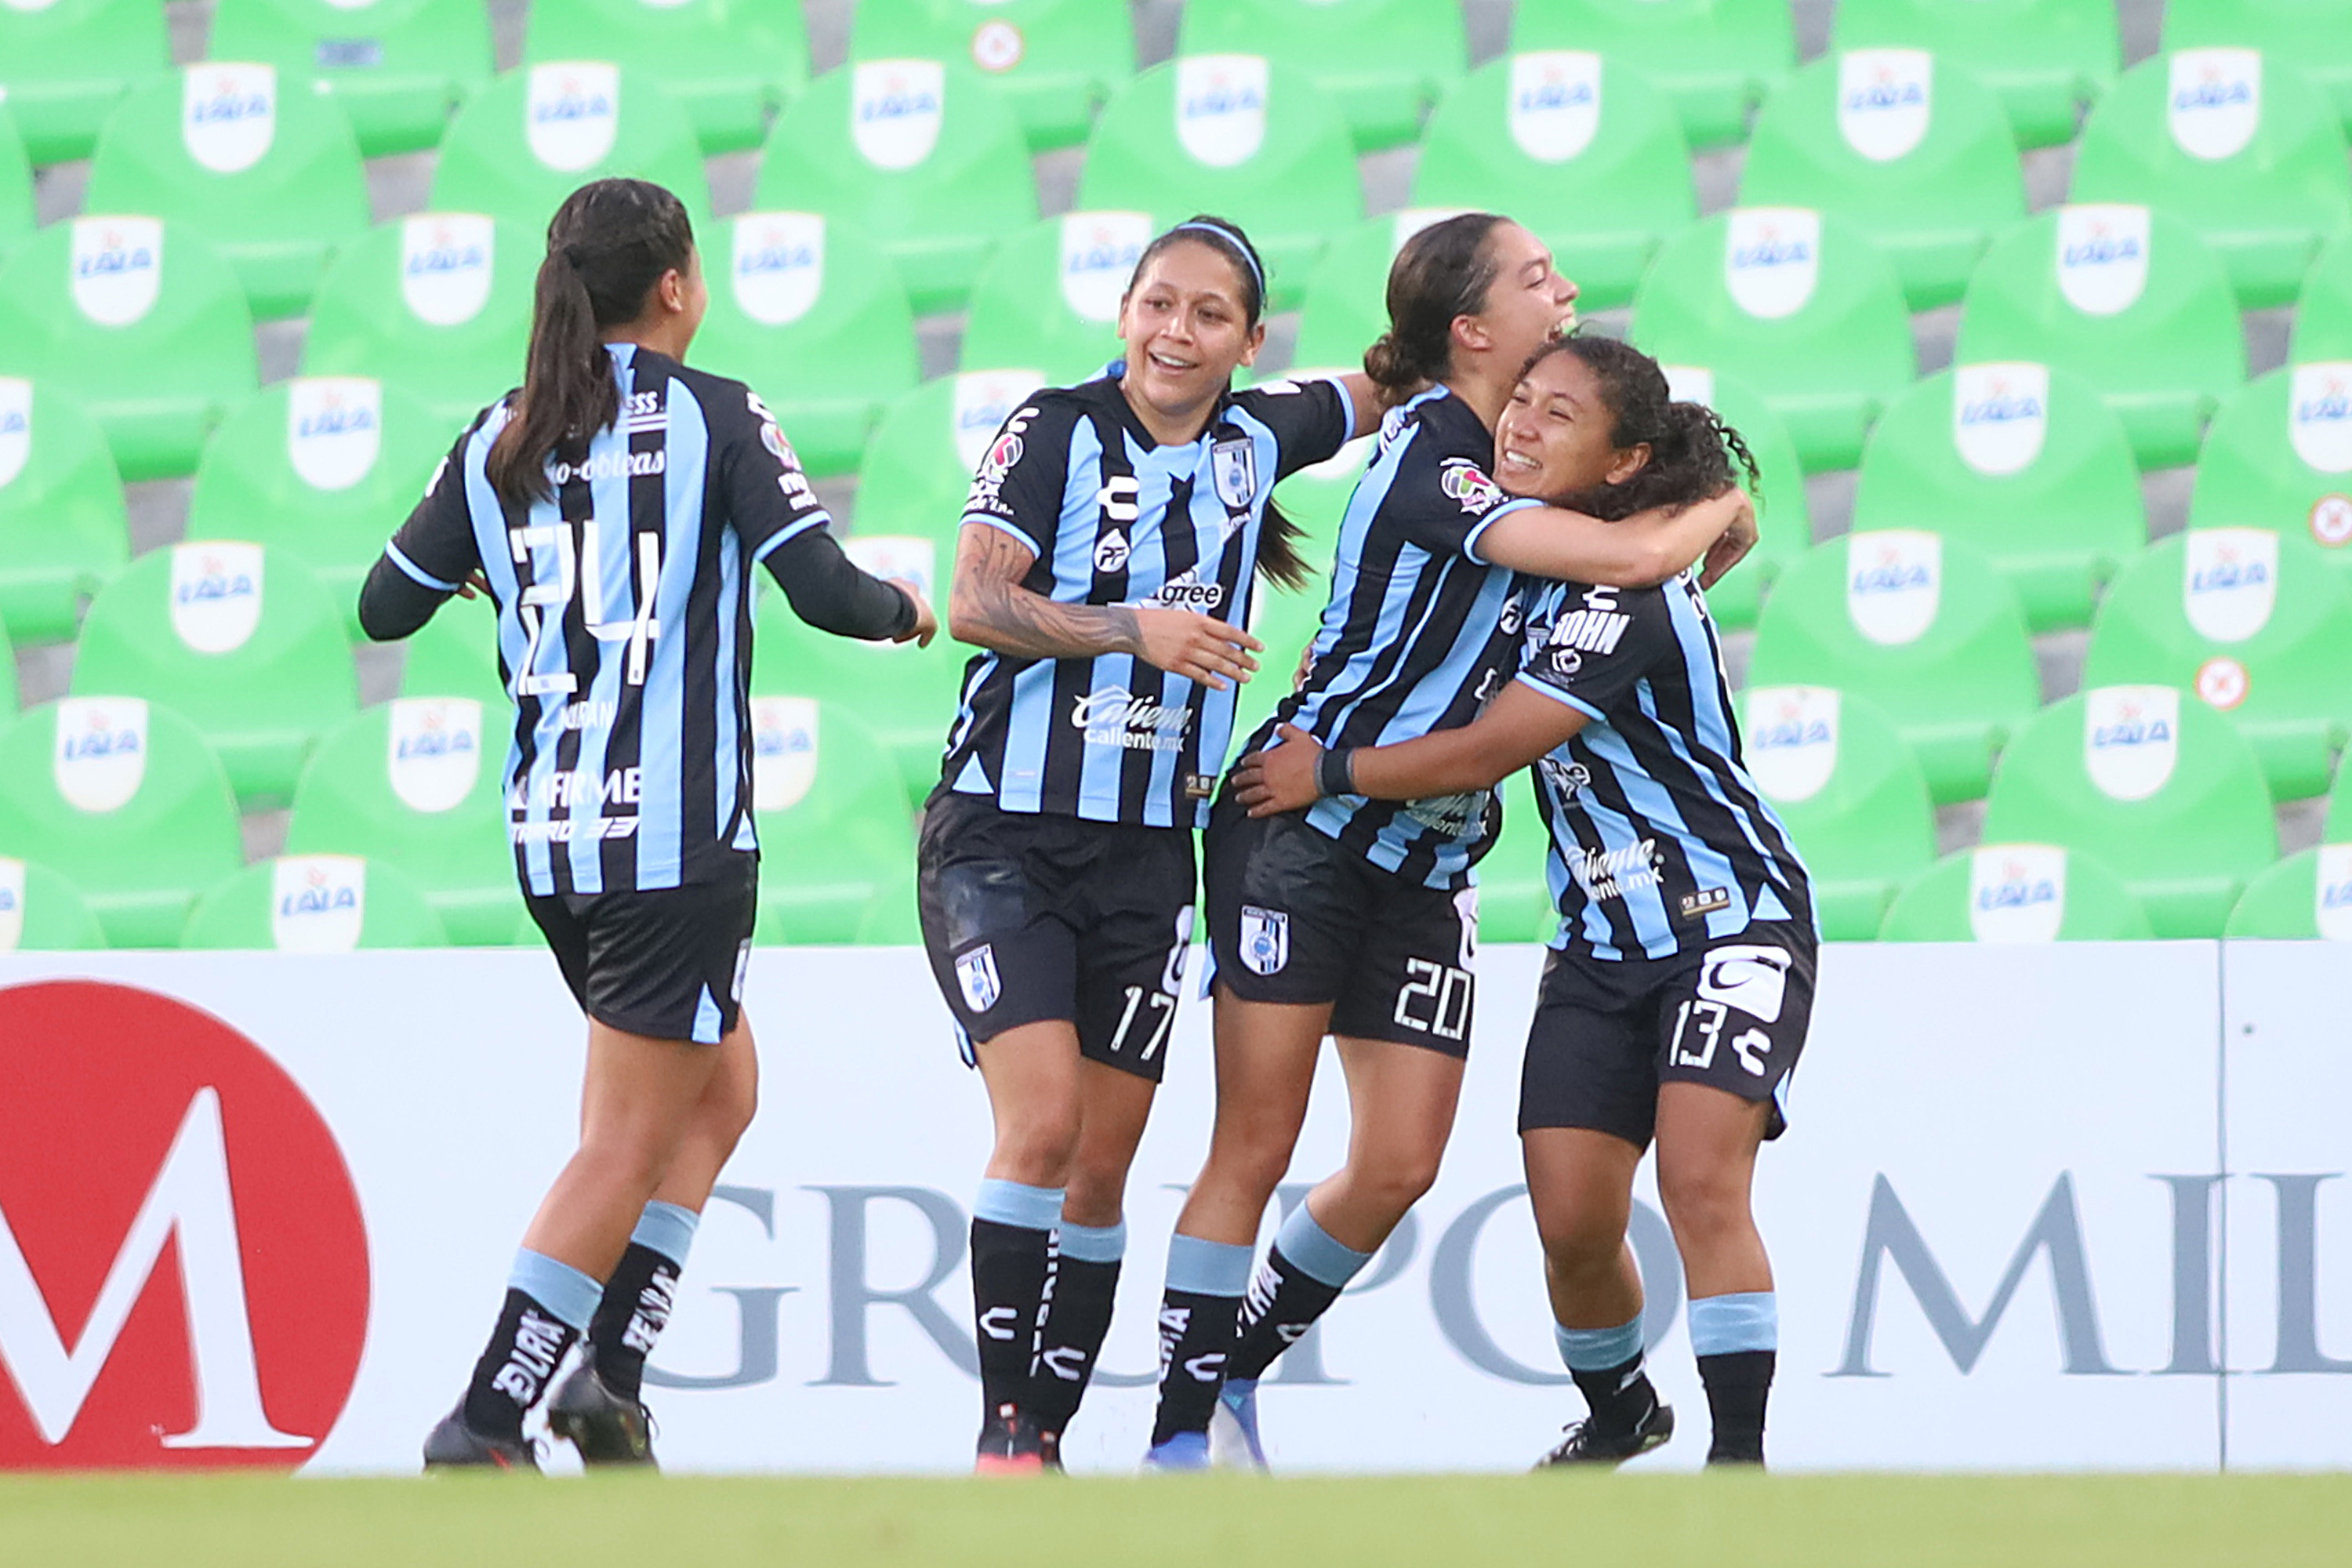 Alejandra Figueroa of Queretaro celebrates with teammates after scoring the second goal of her team during the 1st round match between Santos Laguna and Queretaro as part of the Torneo Apertura 2022 Liga MX Femeni at Corona Stadium on July 10, 2022 in Torreon, Mexico.